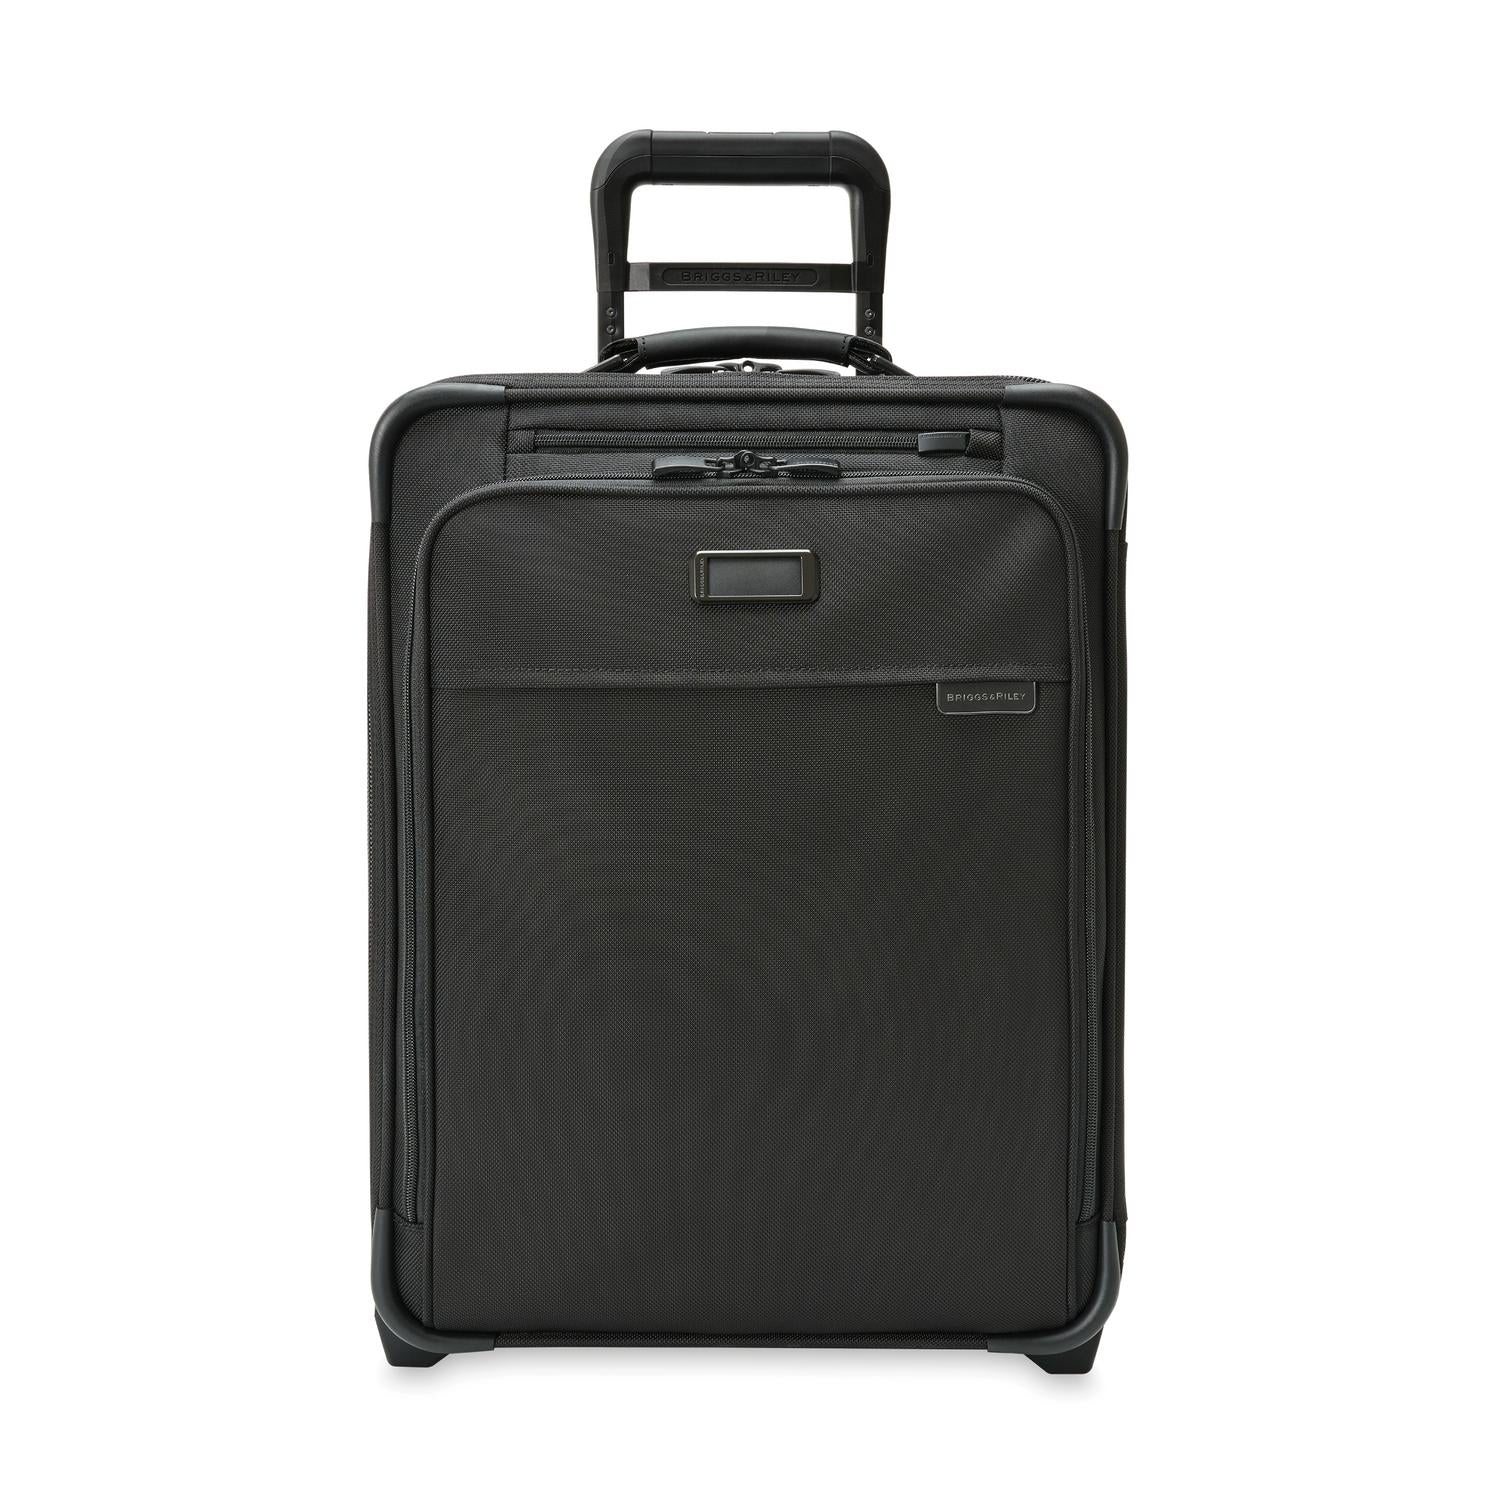 Global 53cm 2-Wheel Expandable Carry-On